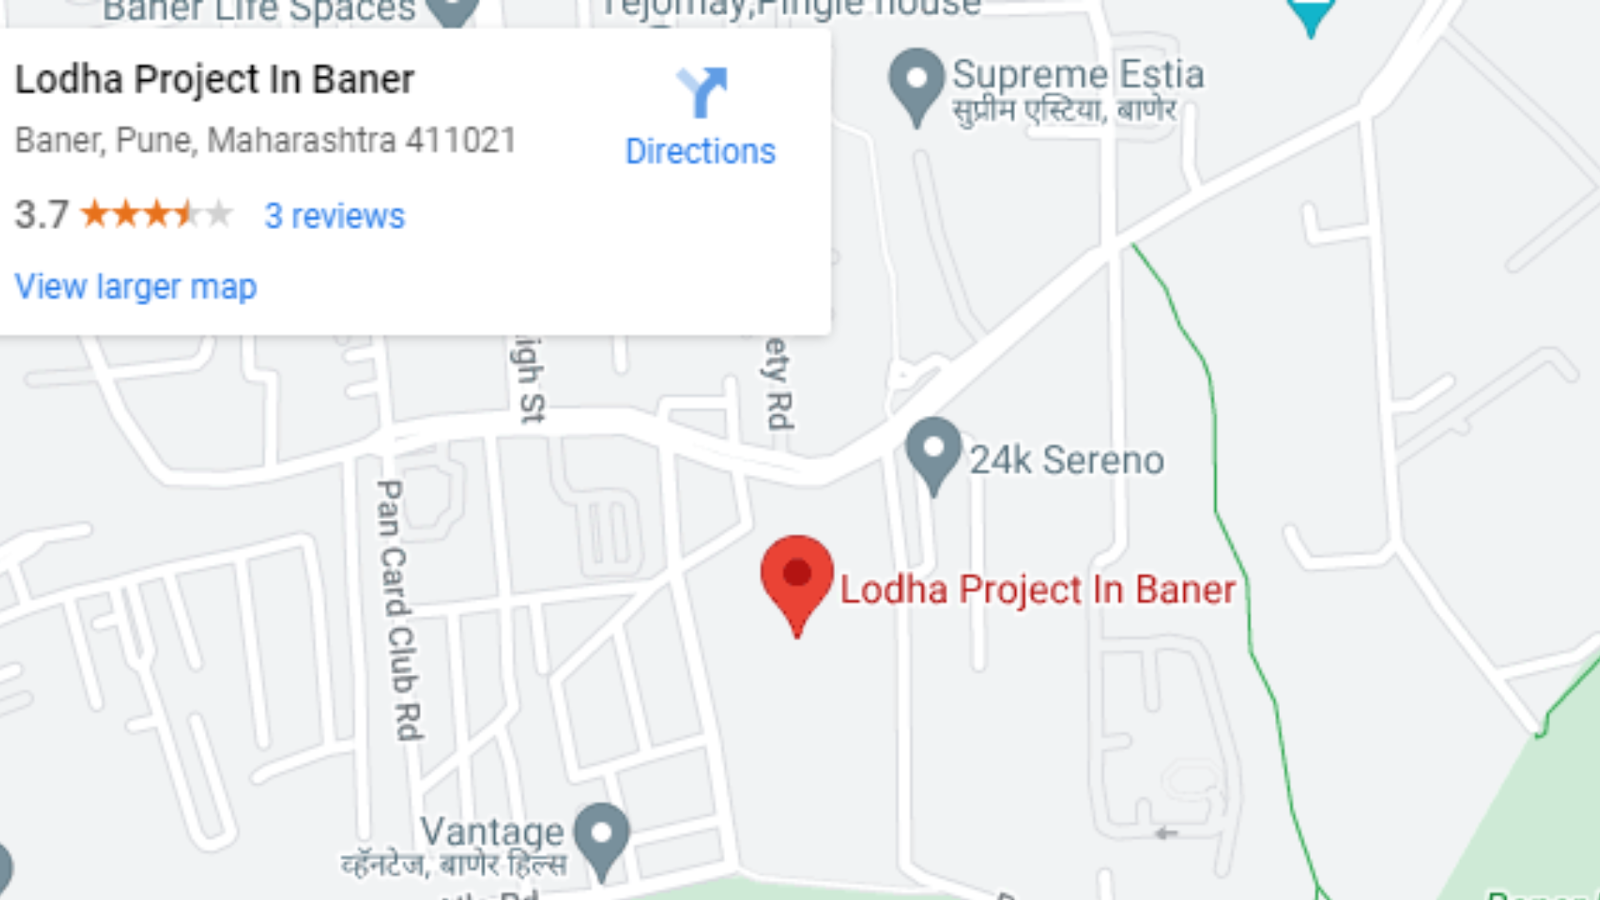 One of the best projects is Lodha Baner Pune, called a dream home location in Baner Pune.